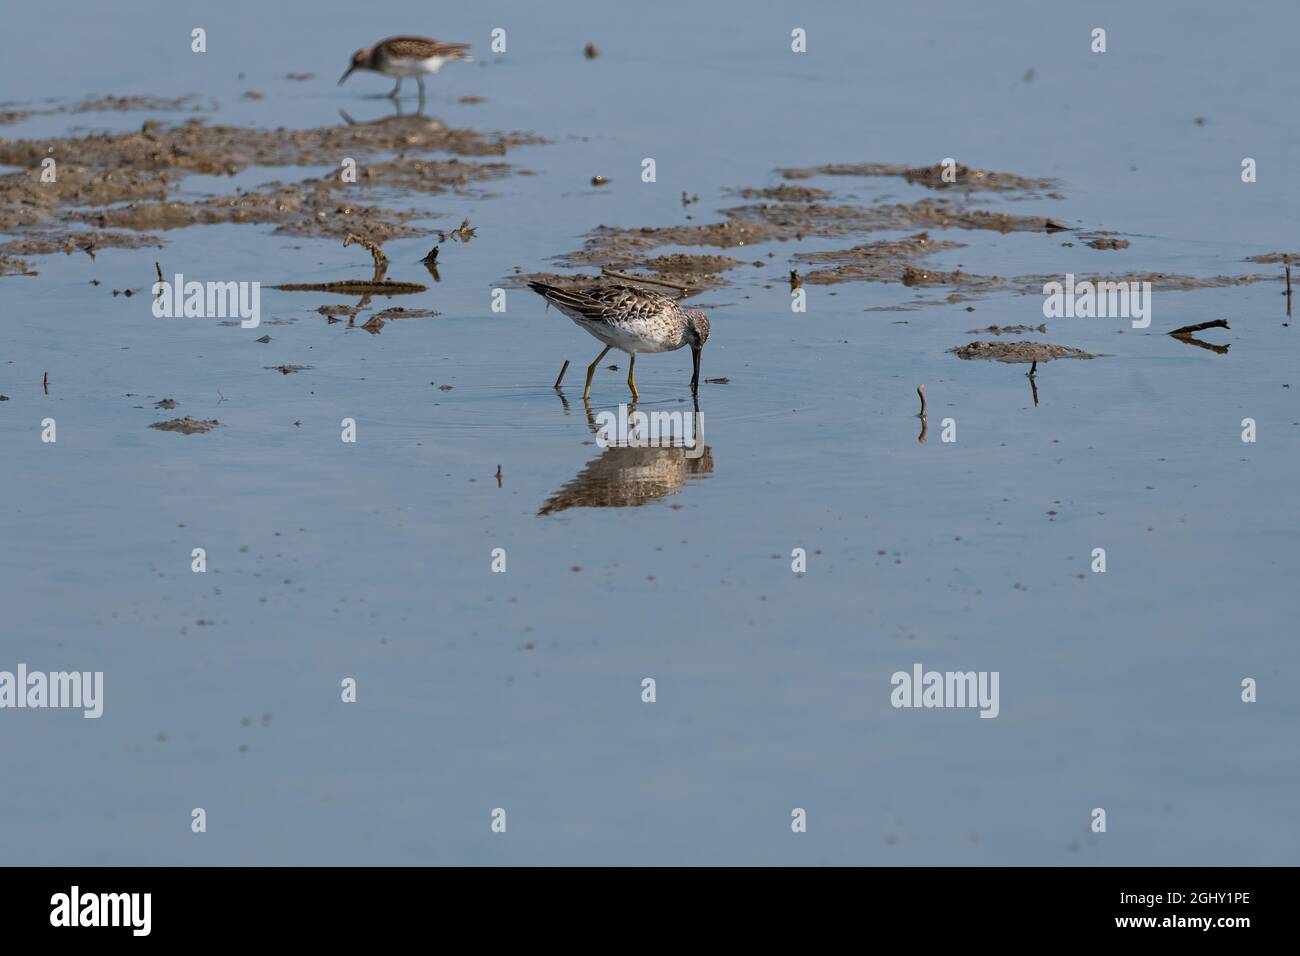 A Great Yellowlegs bird mirrored in the shallow water of a muddy flat as it uses its long beak to search for food in the mud. Stock Photo